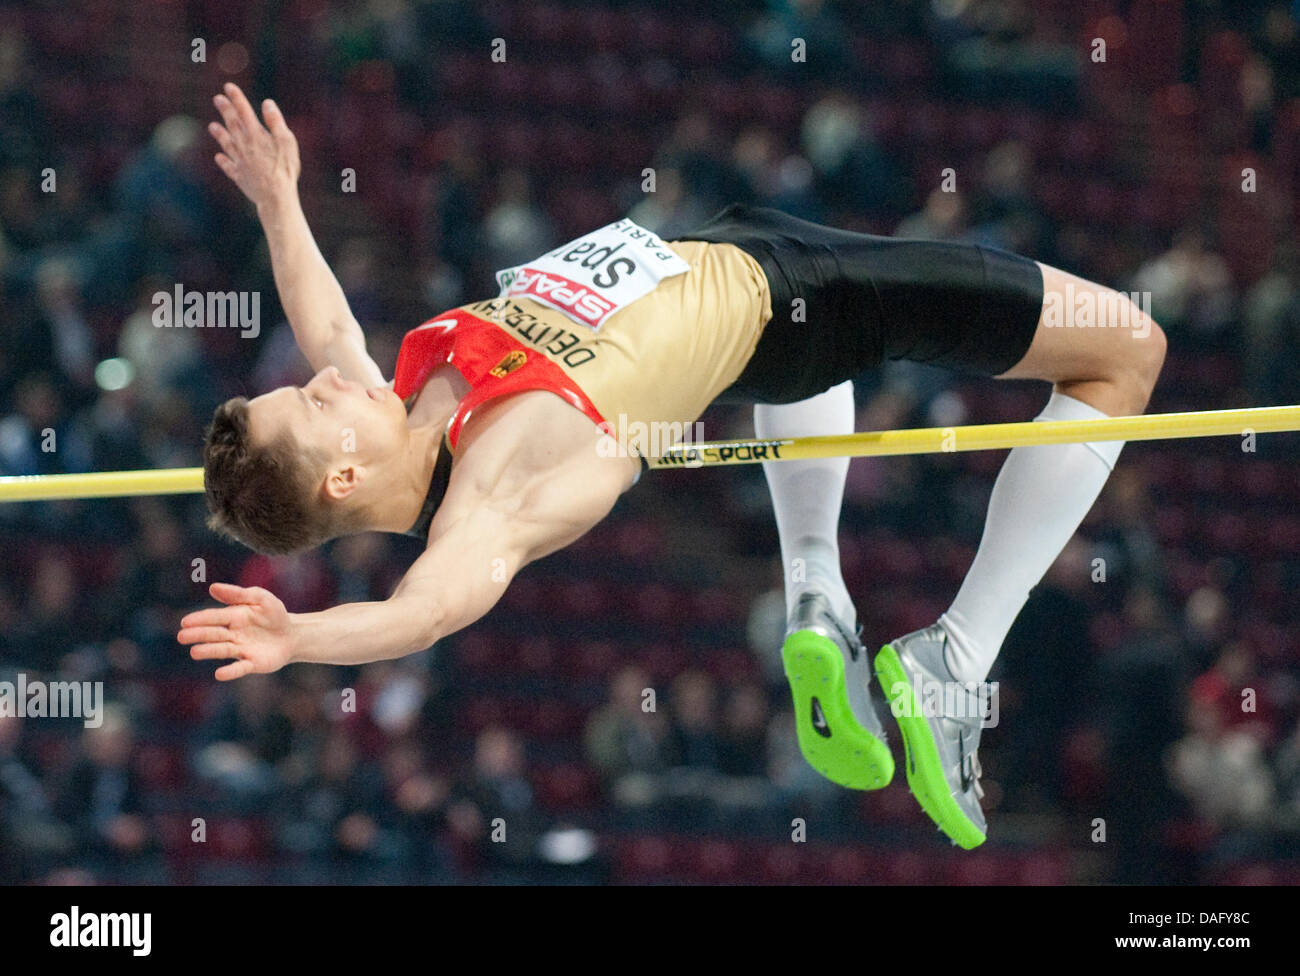 German athlete Raul Spank is pictured during the high jump competition at the European Athletics Indoor Championships at the Palais Omnisports in Paris, France, 05 March 2011. Photo: Bernd Thissen Stock Photo